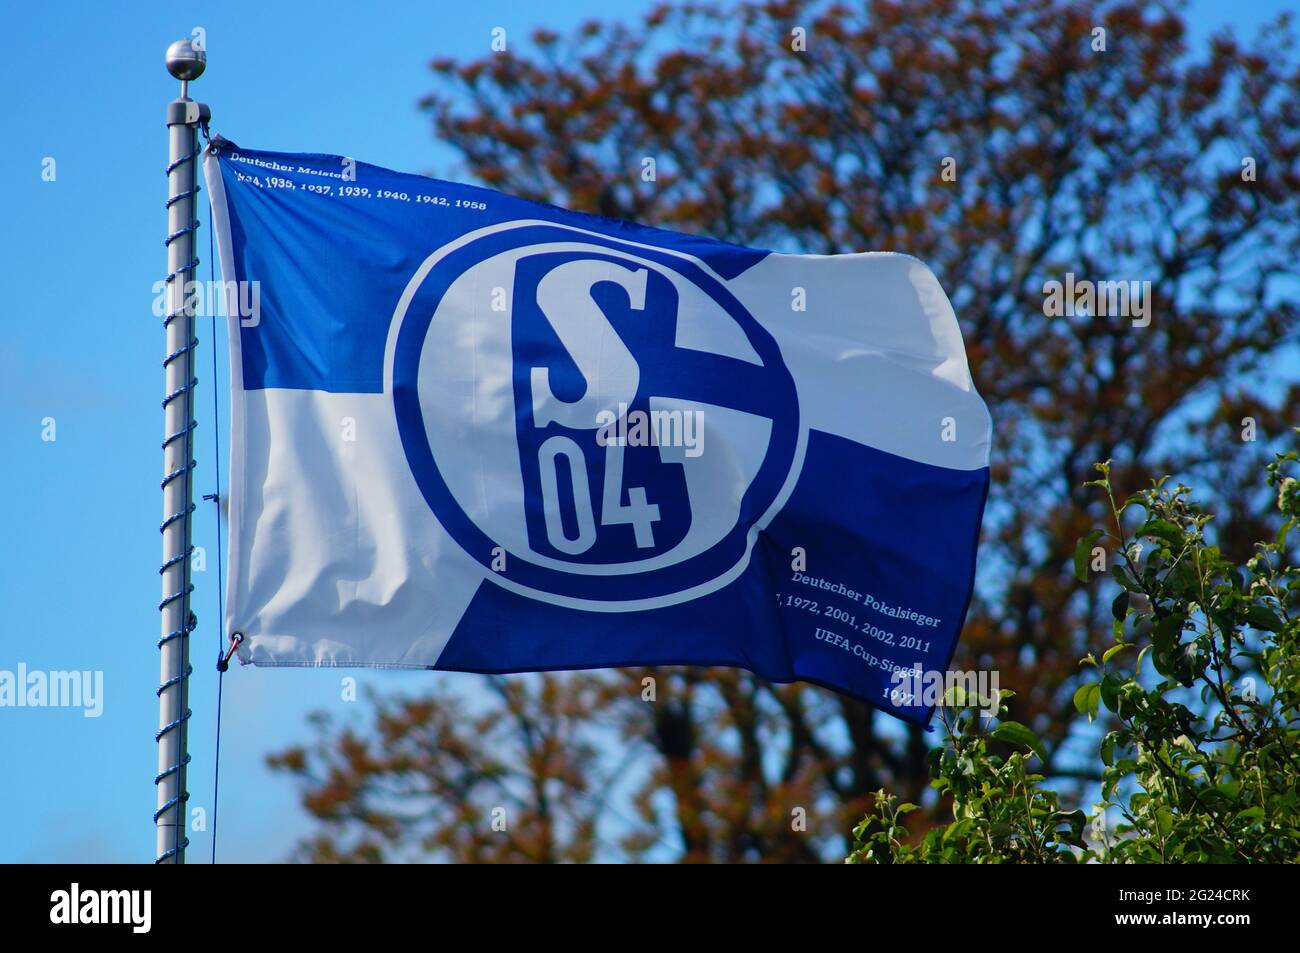 FRANKFURT, GERMANY - May 26, 2021: A Schalke 04 flag flies in an allotment garden in Frankfurt. After 30 years in the 1st Bundesliga, relegation to th Stock Photo